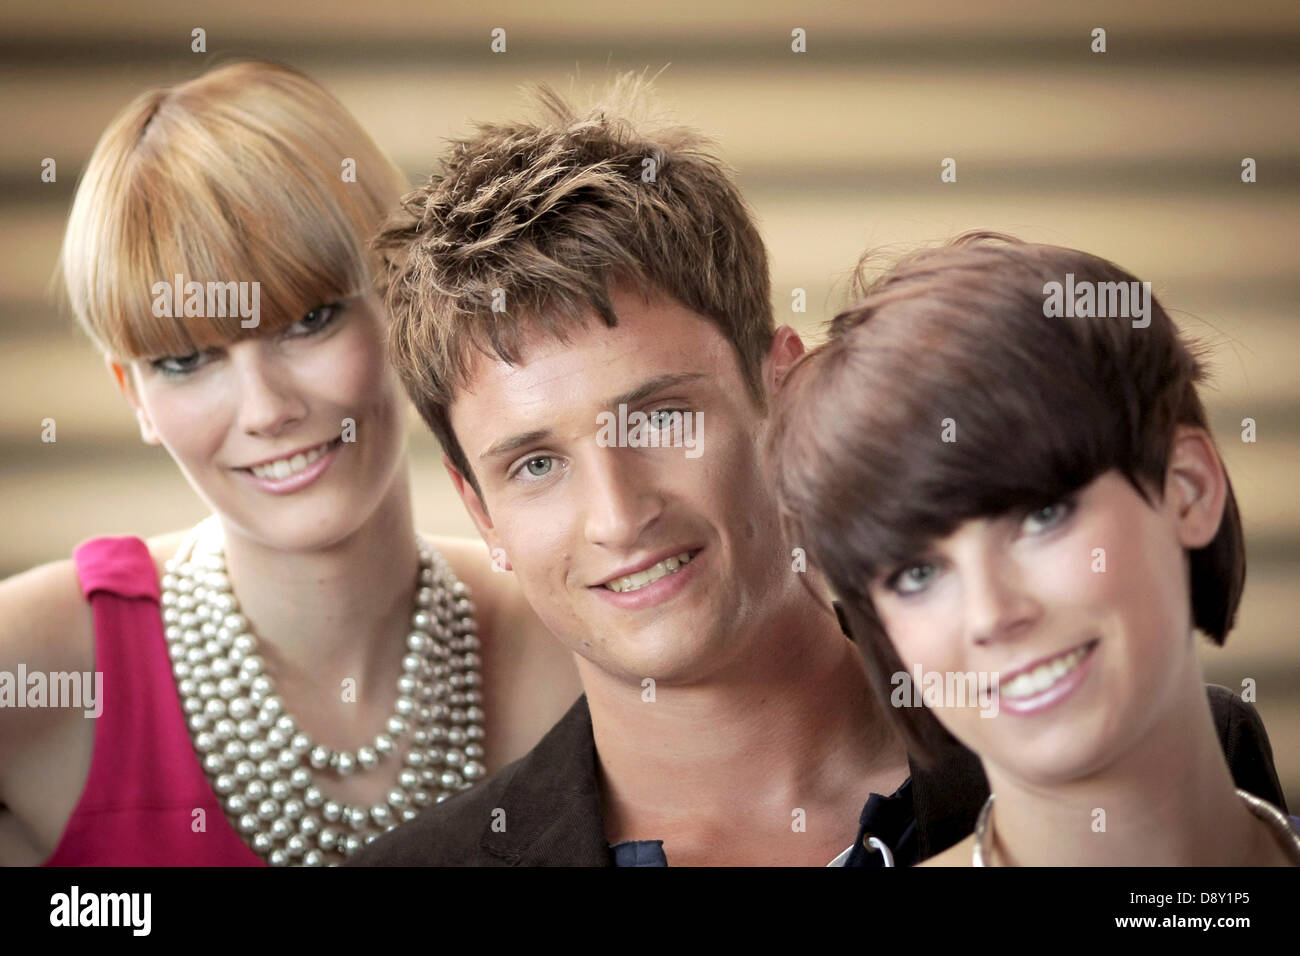 The models Ramona (R), Tim and Vanessa present the new haircut trends 'Aufgesetzter Bob' ('Bob put on top') (L-R), 'Mr Spock' and 'Dr Bob'  at the fair 'Hair and Beauty 2013' in Frankfurt/Main, Germany, 06 June 2013. The fair presenting this summer's haircuts by the central association of the German hairdresser trade amongst other things will take place on 09 and 10 June 2013. Photo: FREDRIK VON ERICHSEN Stock Photo